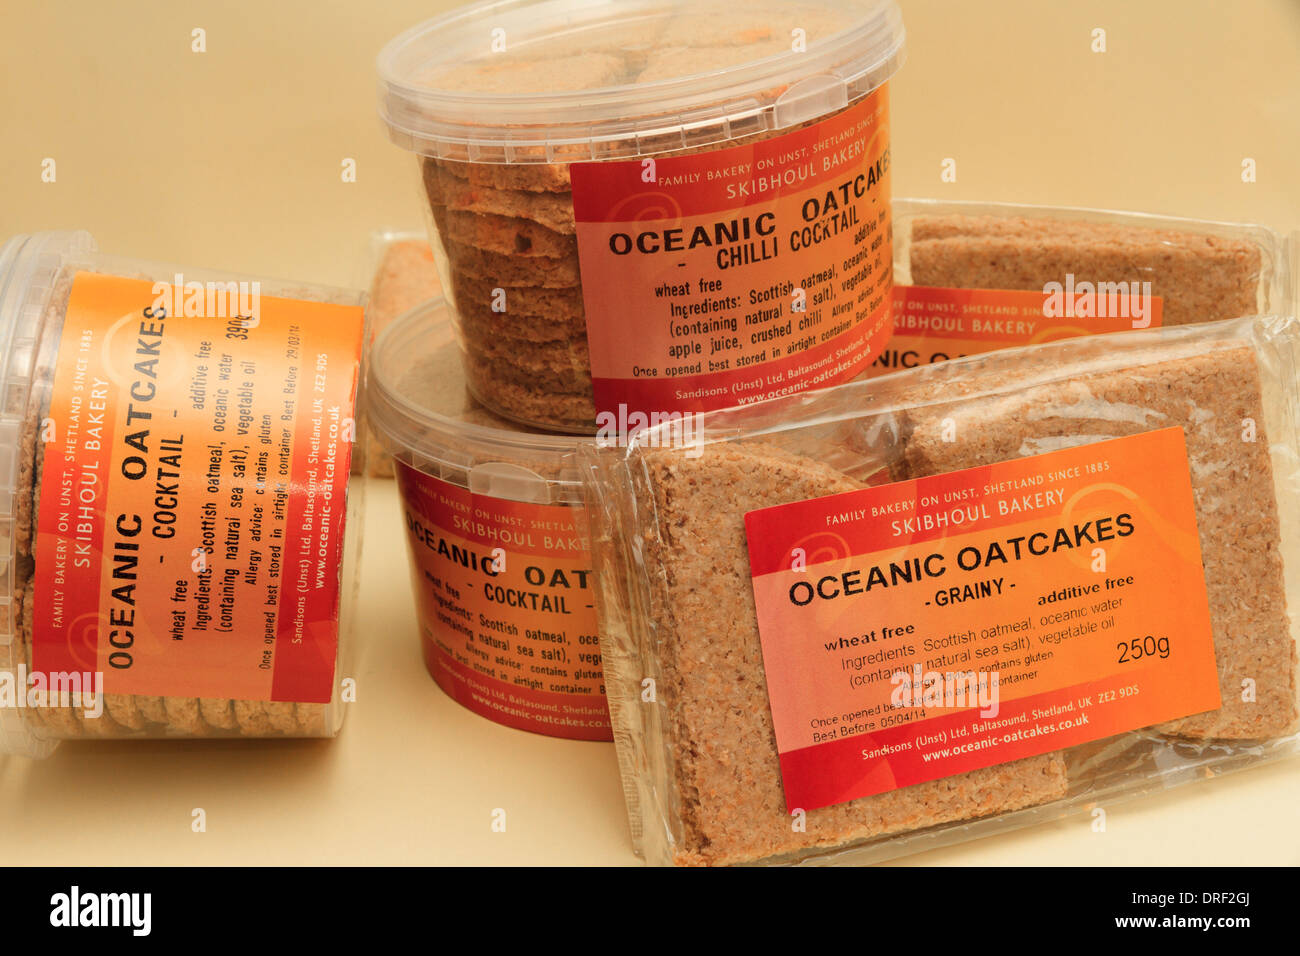 Tubs and packets of Ocean Oatcakes, natural biscuits made with seawater, from the Shetland Islands, UK Stock Photo